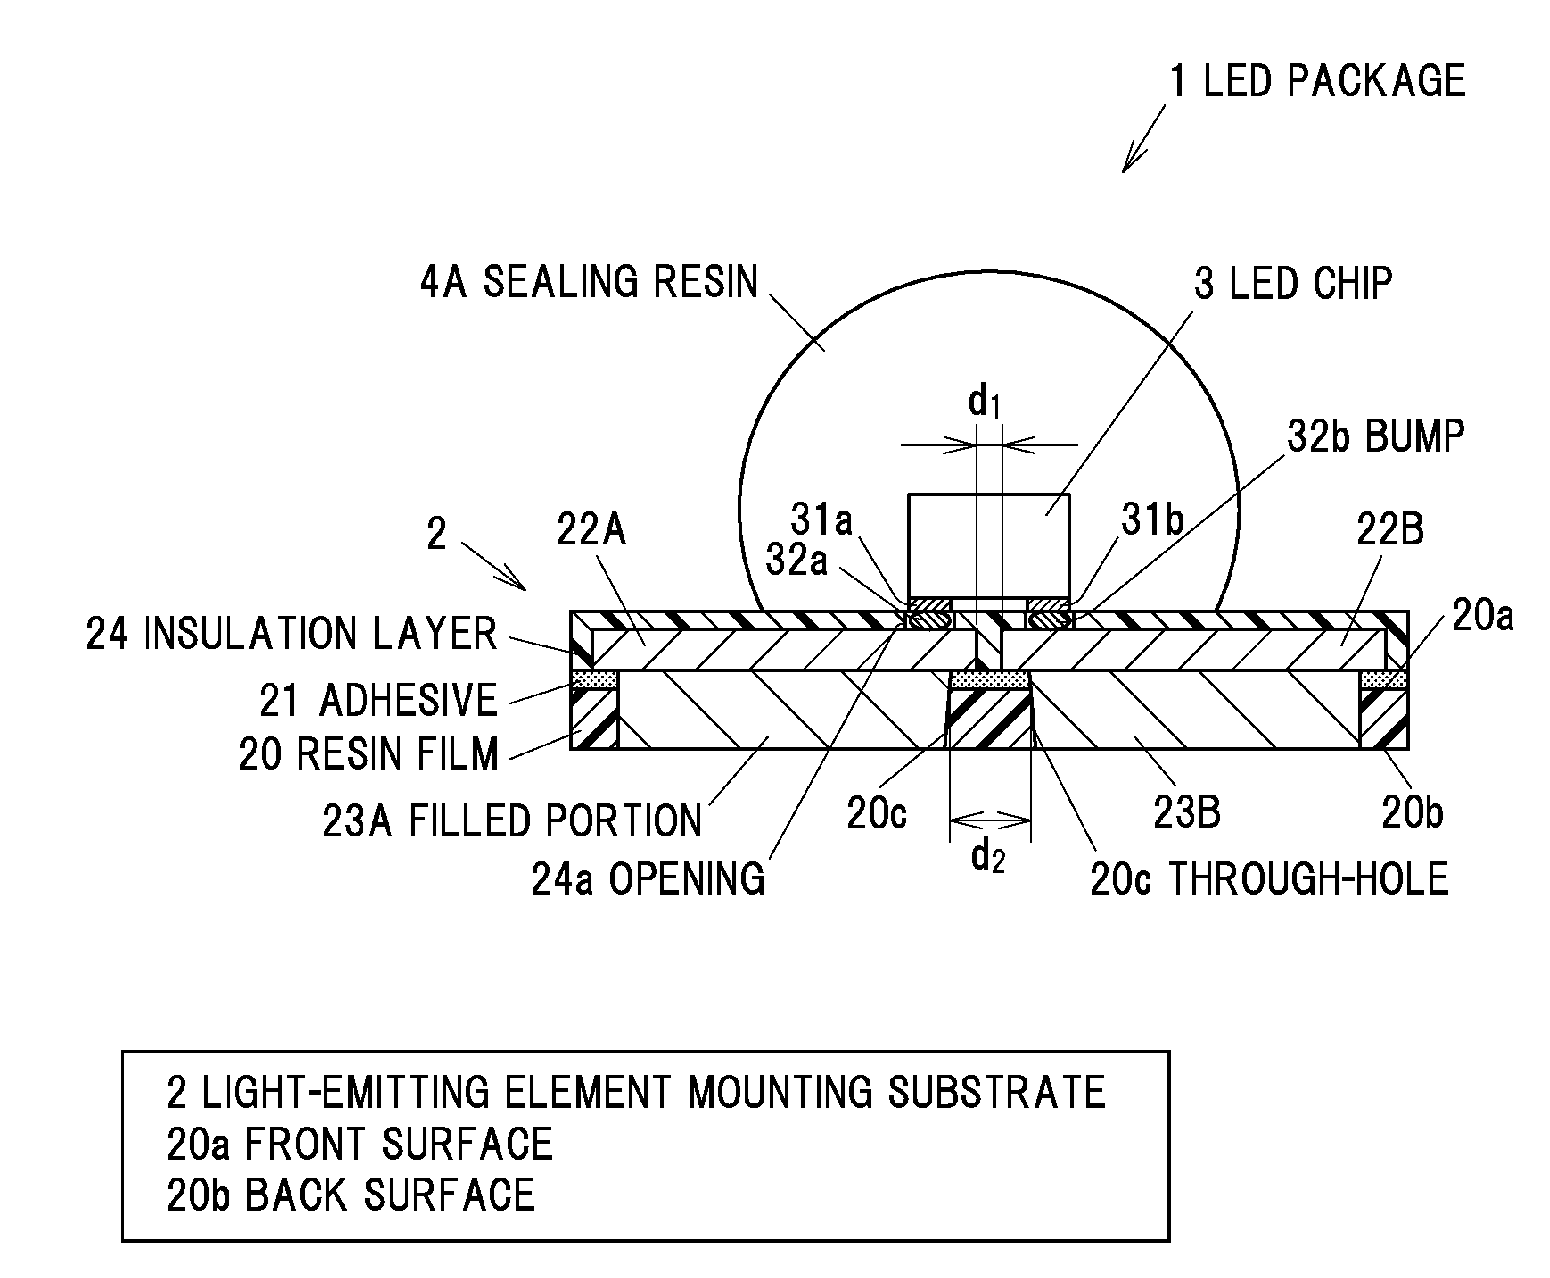 Light-emitting element mounting substrate and LED package